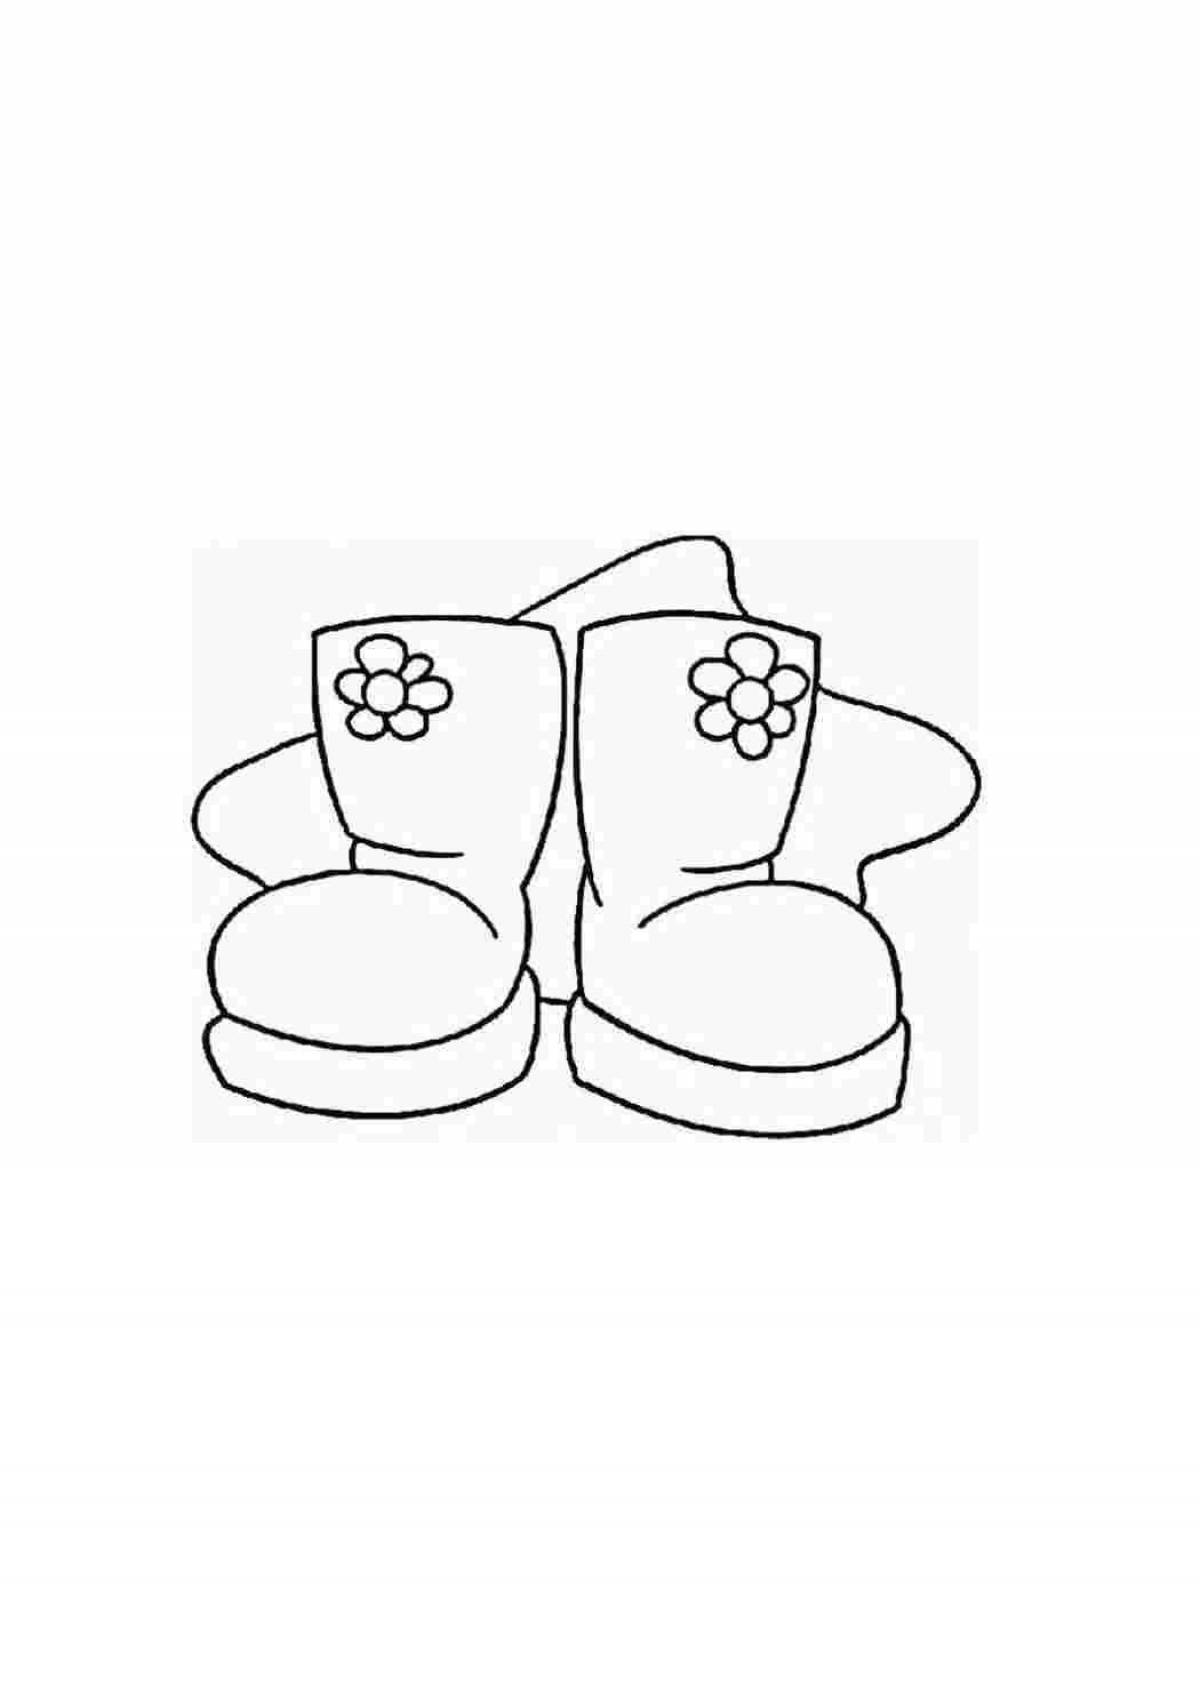 Coloring page elegant winter boots